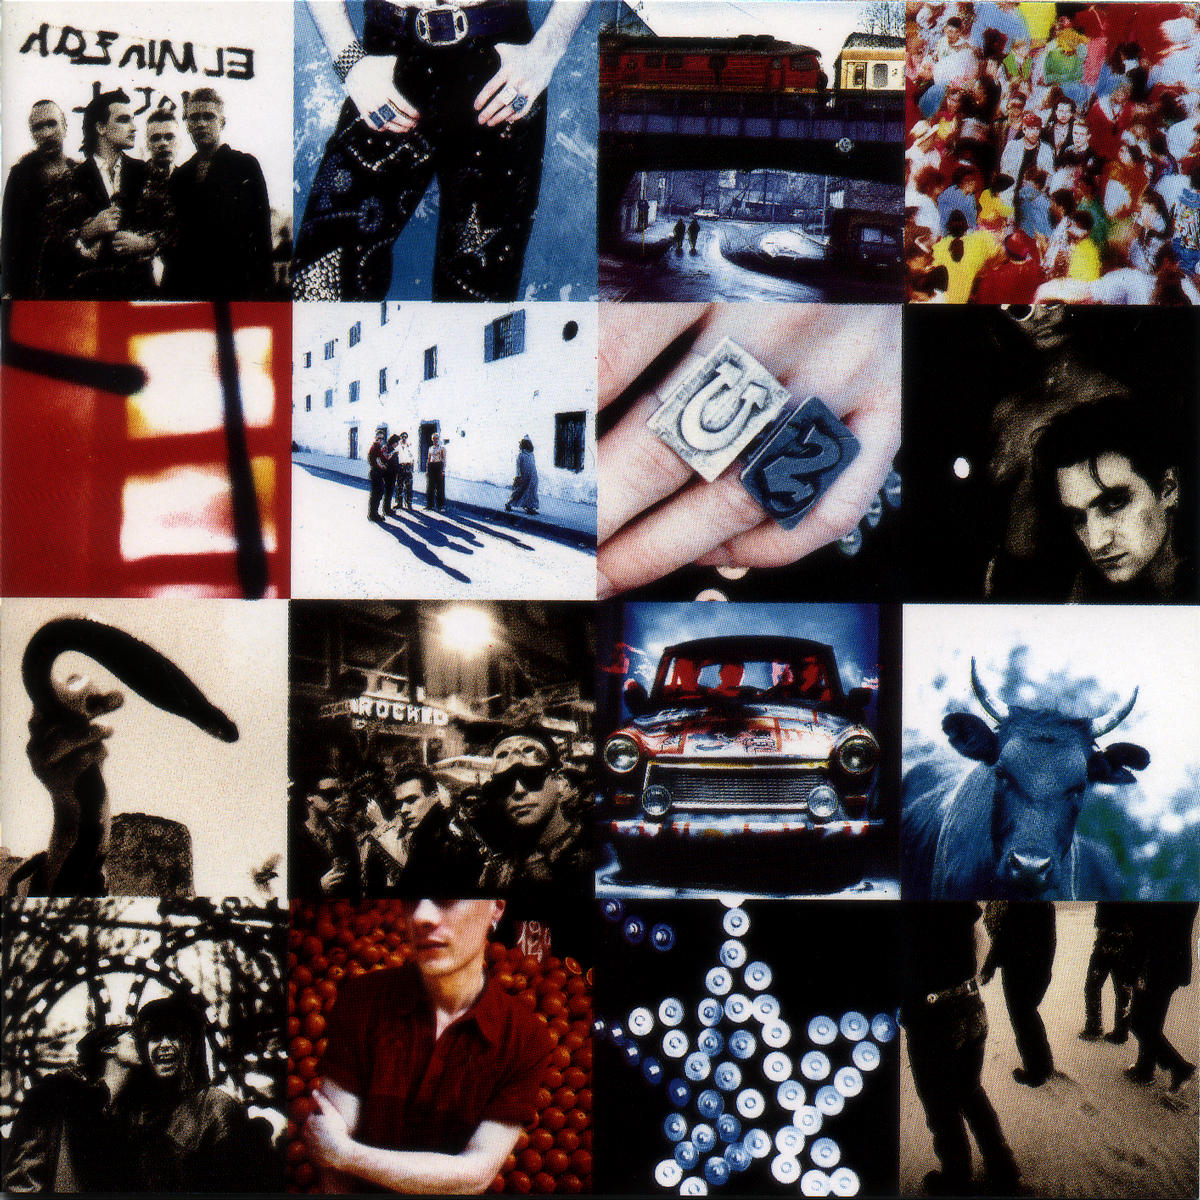 (CD) Achtung U2 (Remastered) - Baby -